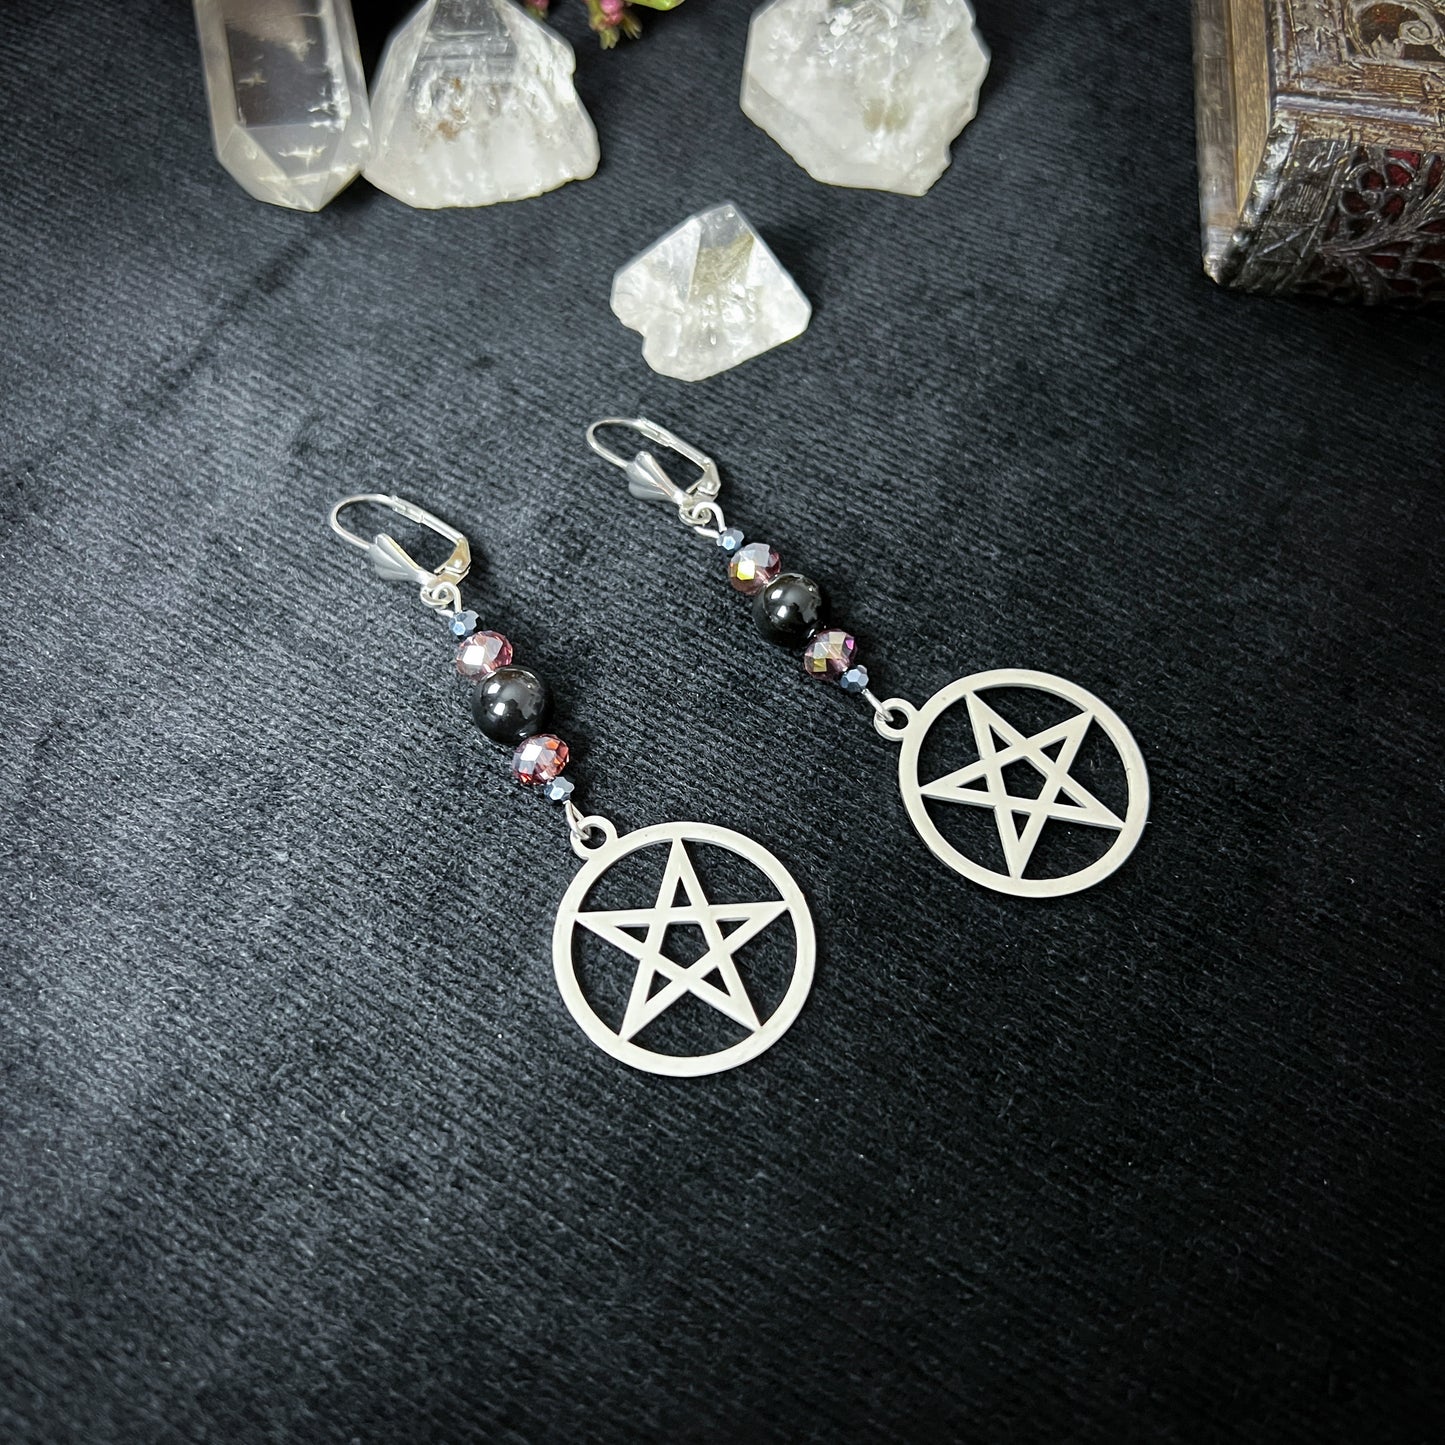 Inverted pentacle earrings made with stainless steel, obsidian and austrian crystal Baguette Magick